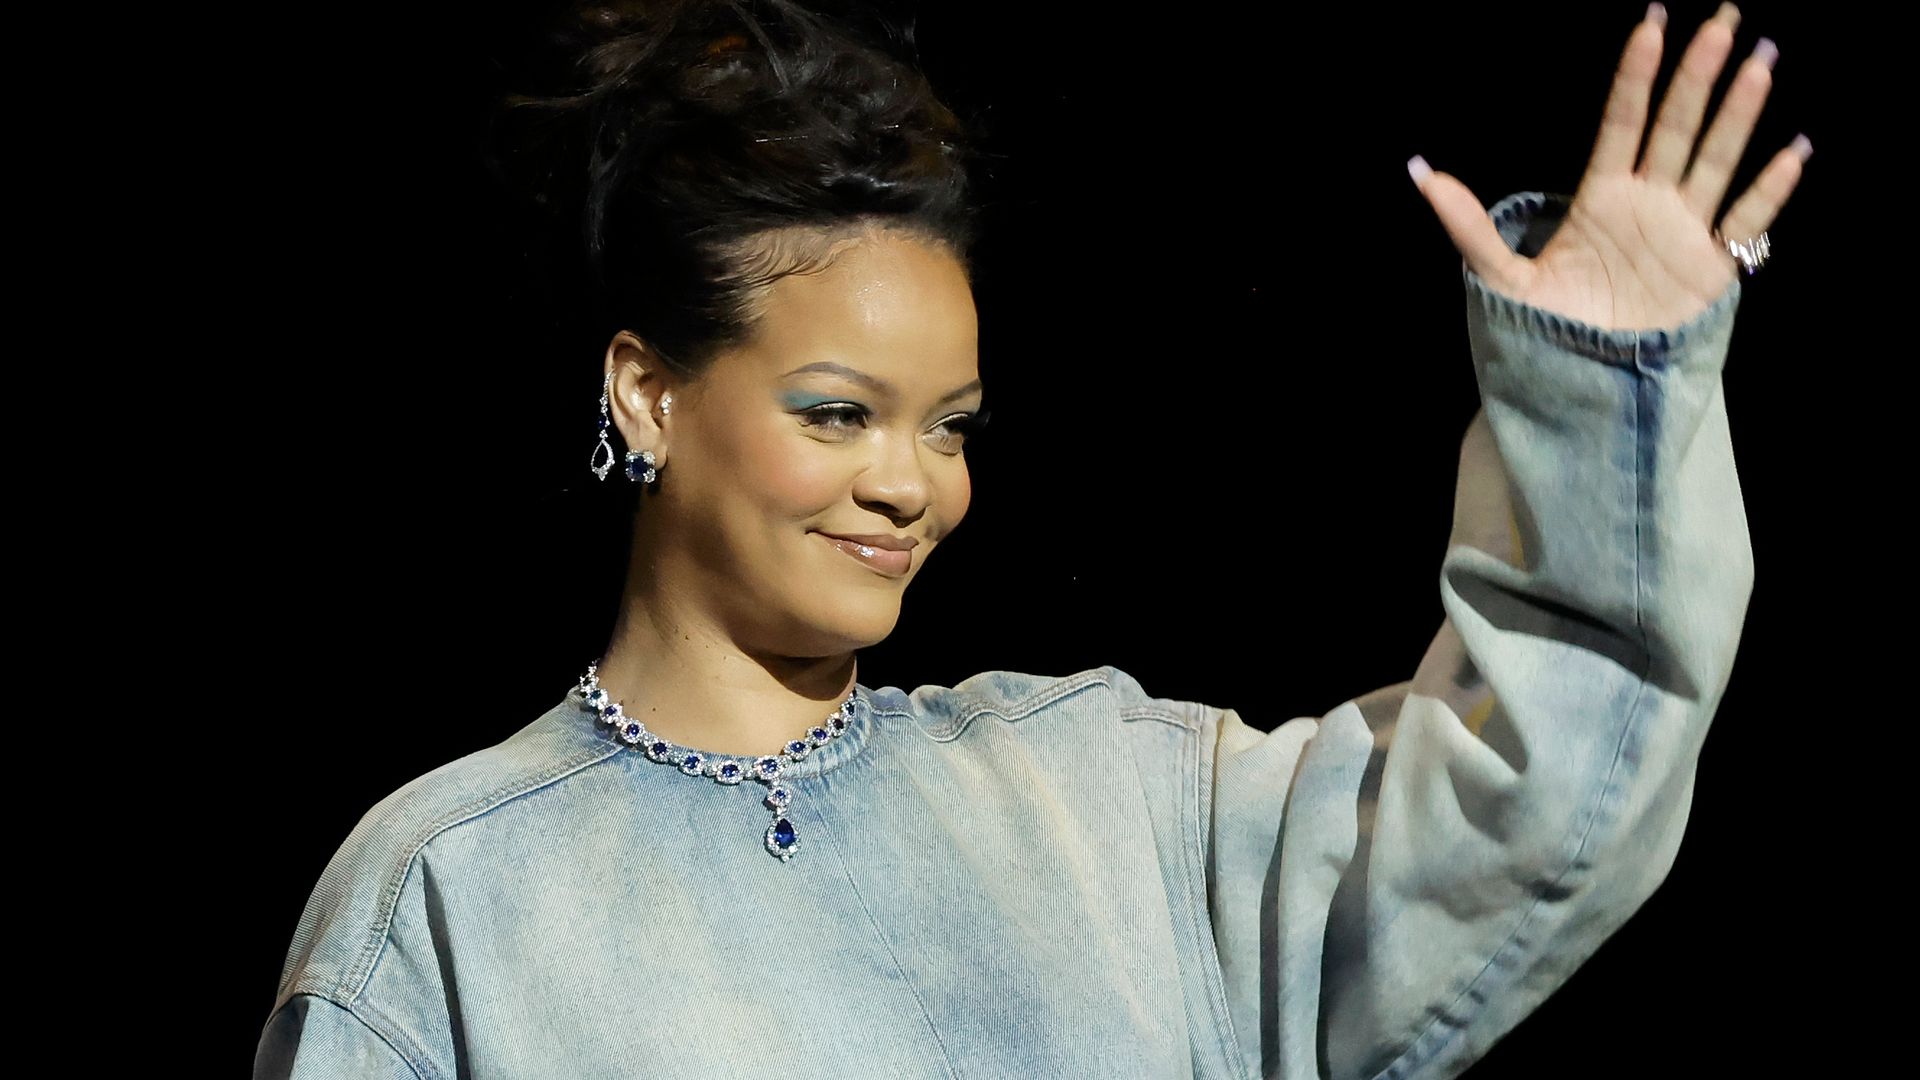 Rihanna speaks onstage, promoting the upcoming Smurfs film